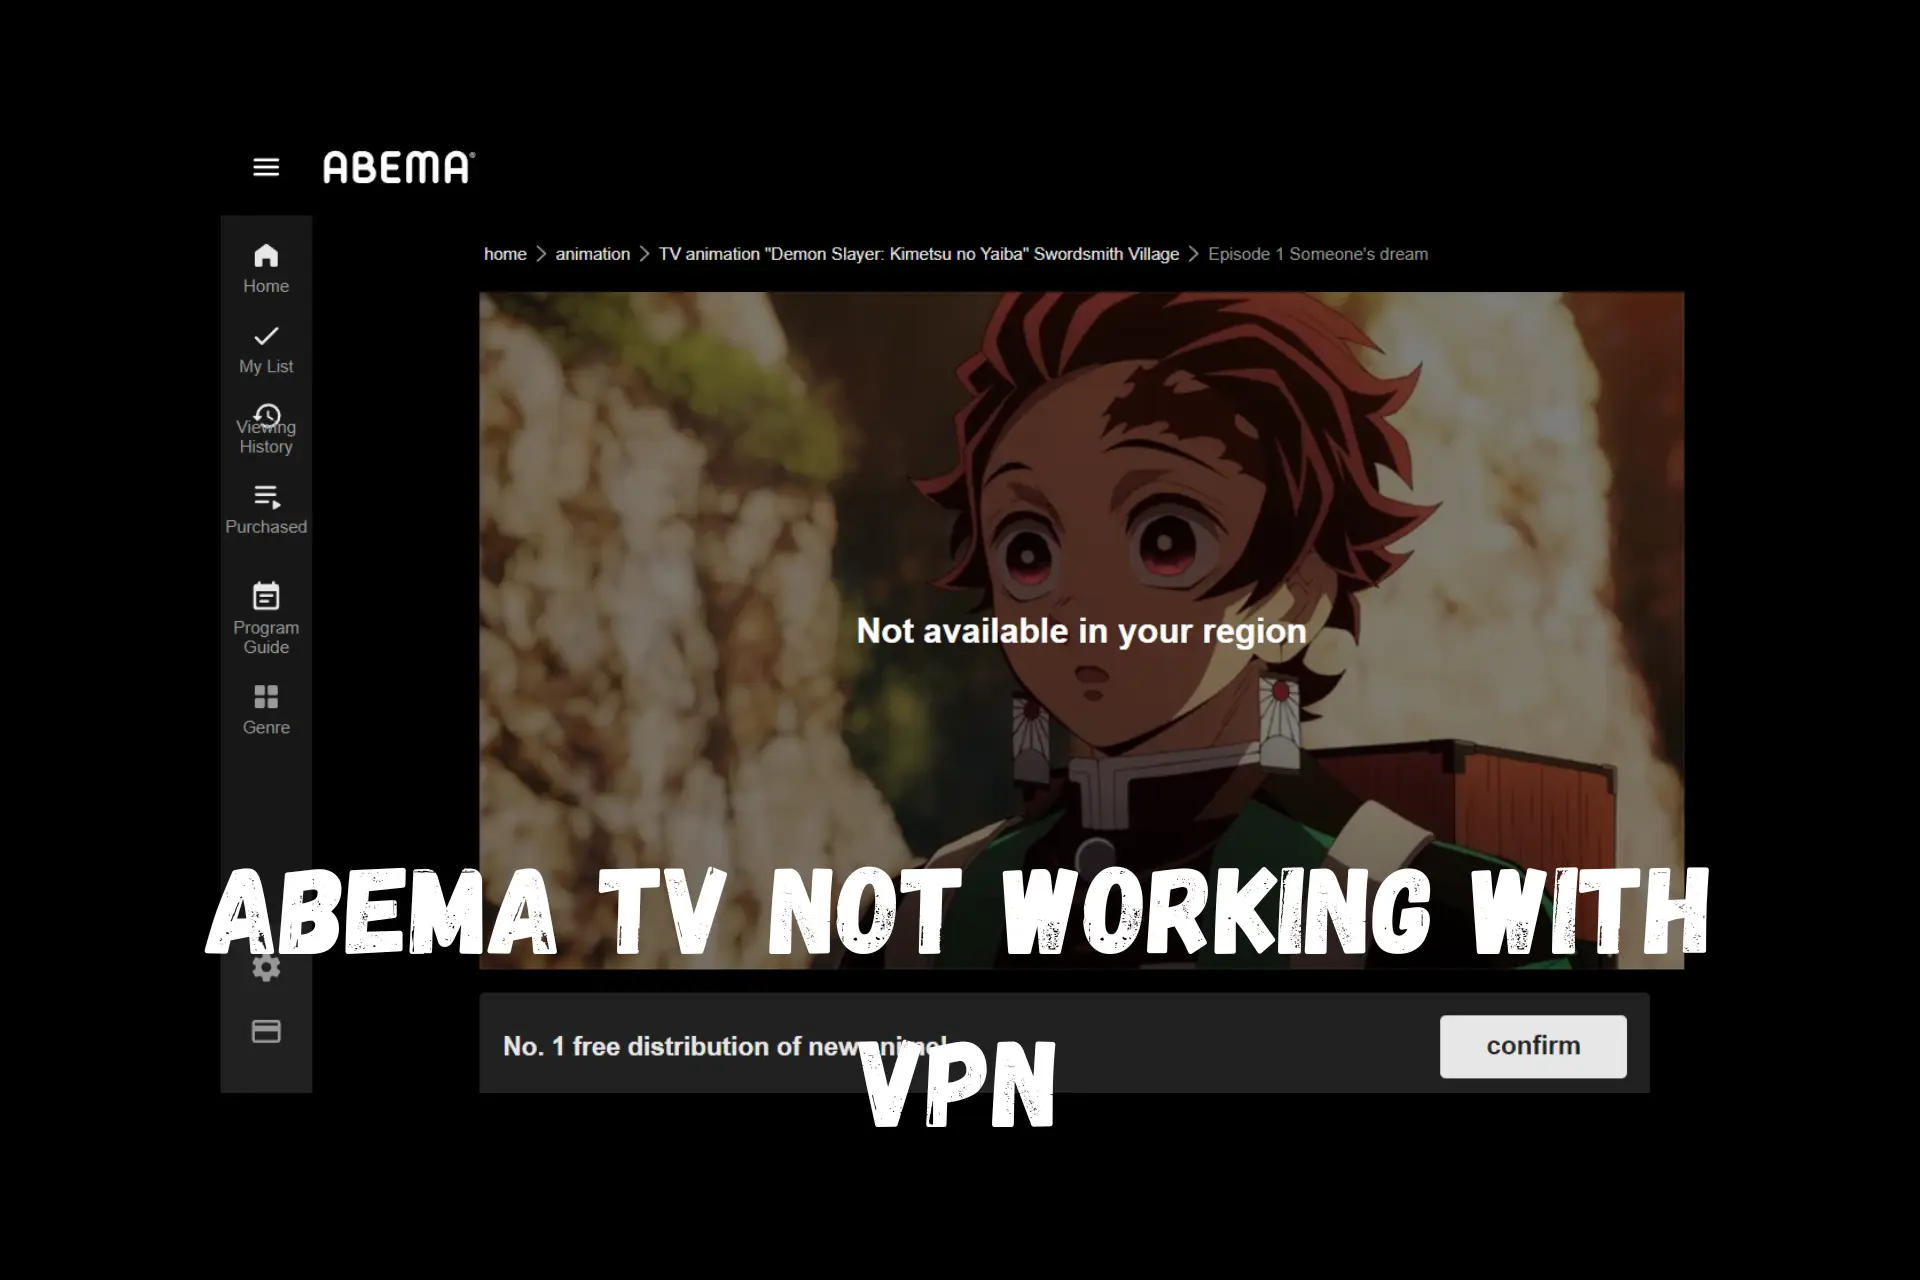 Abema TV not working with VPN